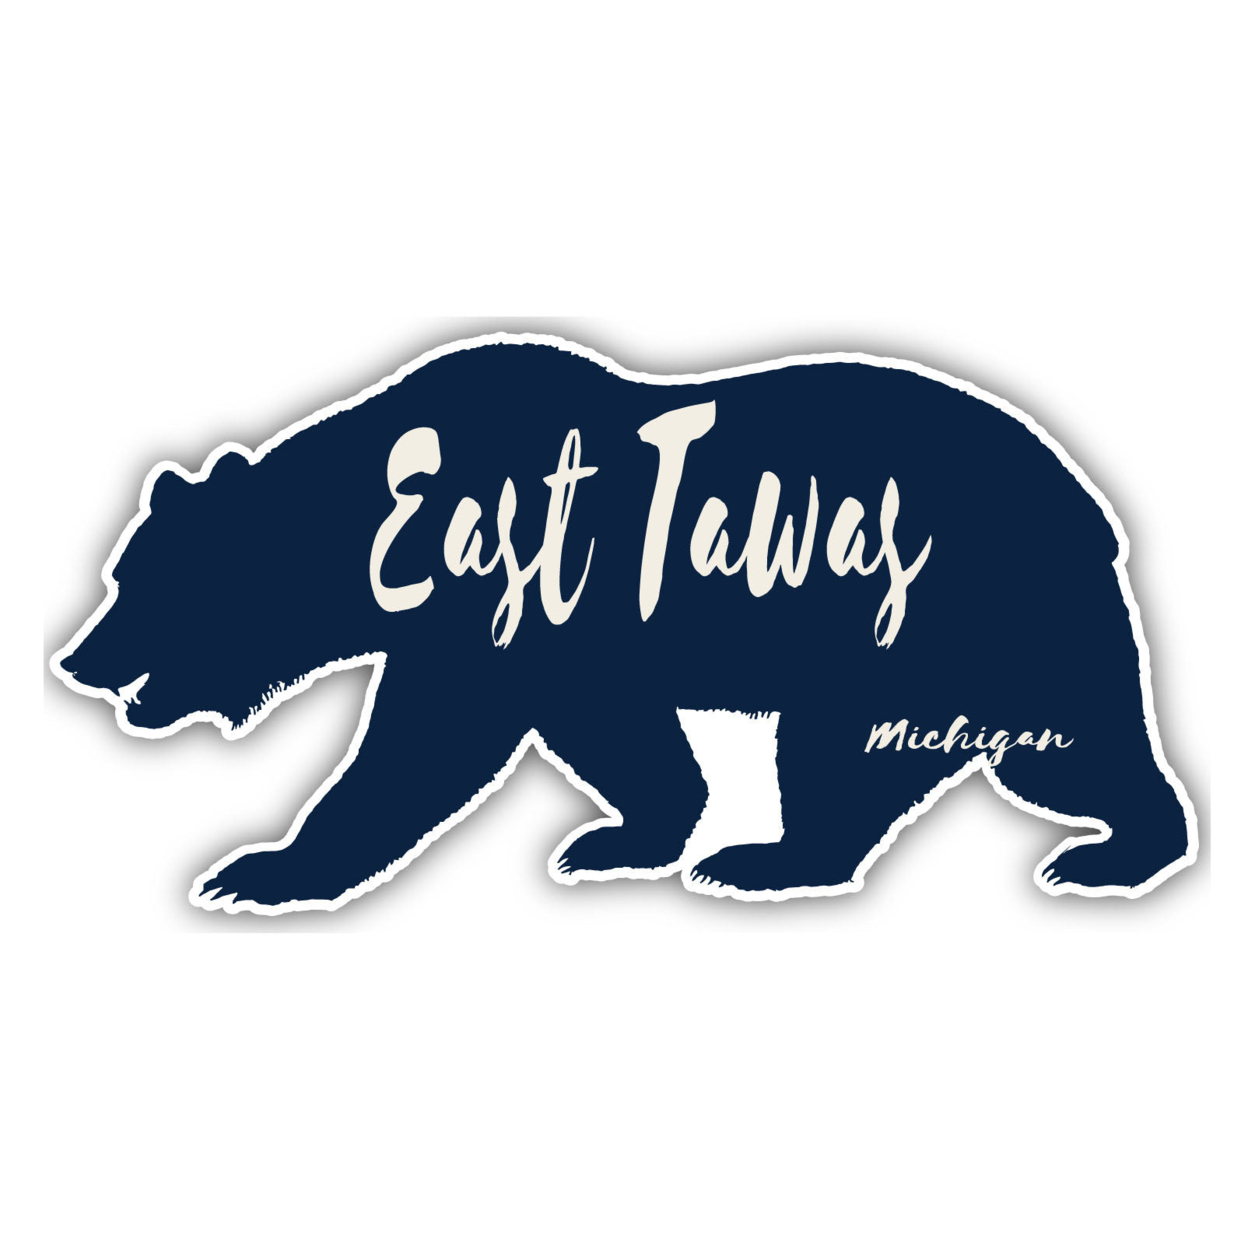 East Tawas Michigan Souvenir Decorative Stickers (Choose Theme And Size) - 4-Pack, 2-Inch, Bear